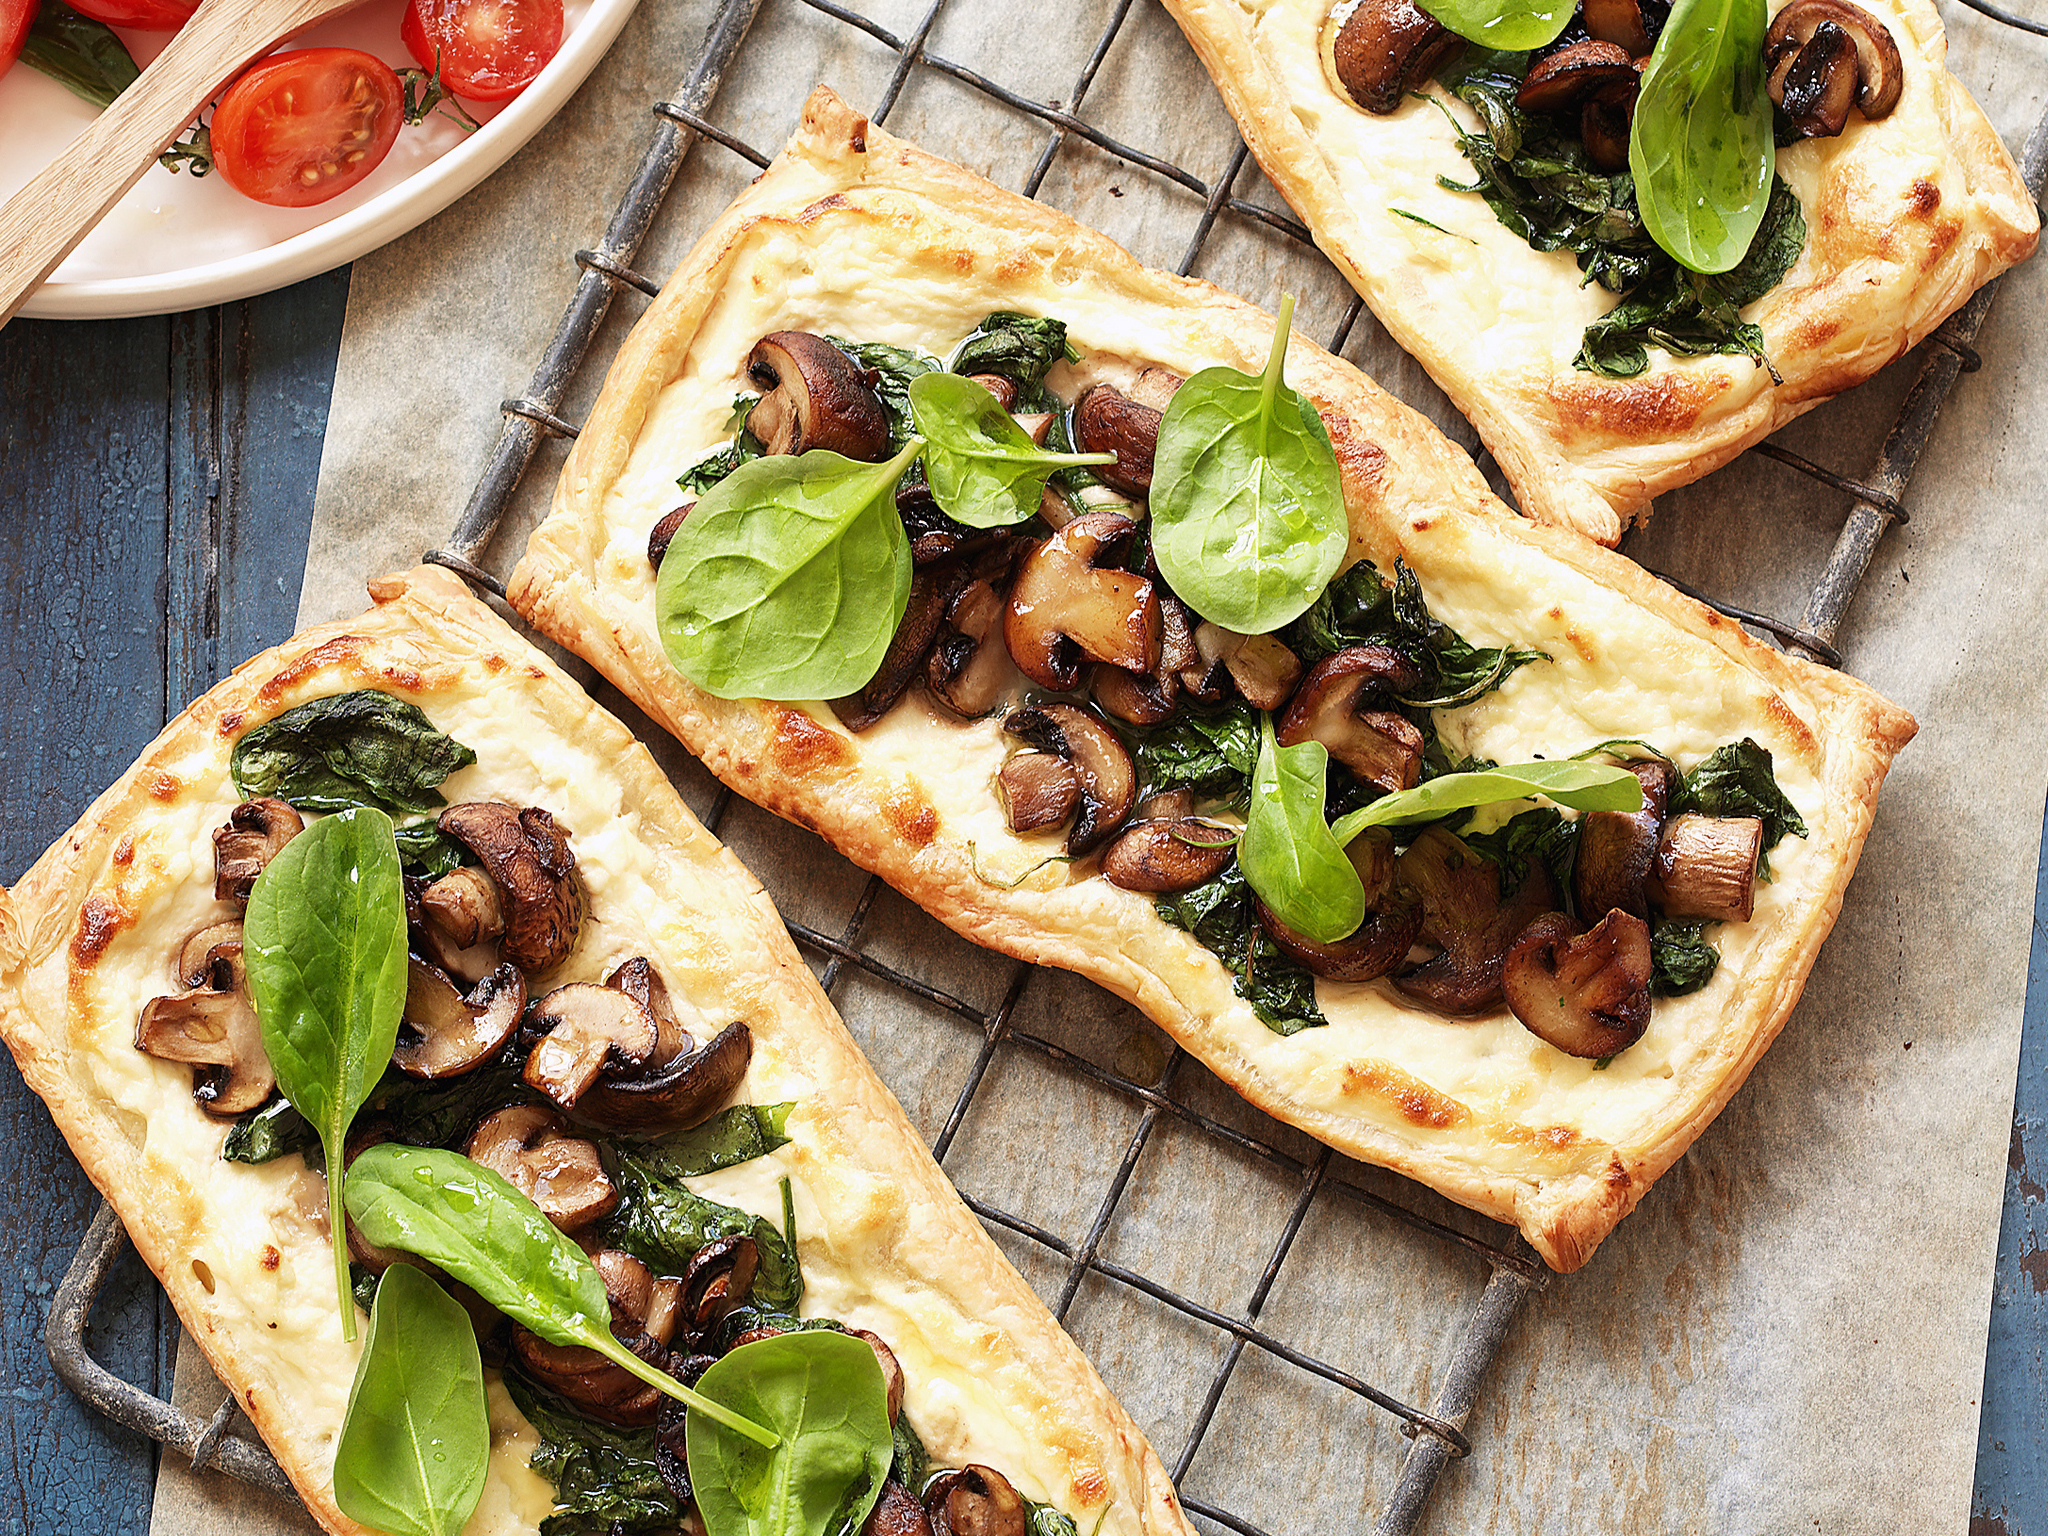 Mushroom and spinach tarts with tomato salad